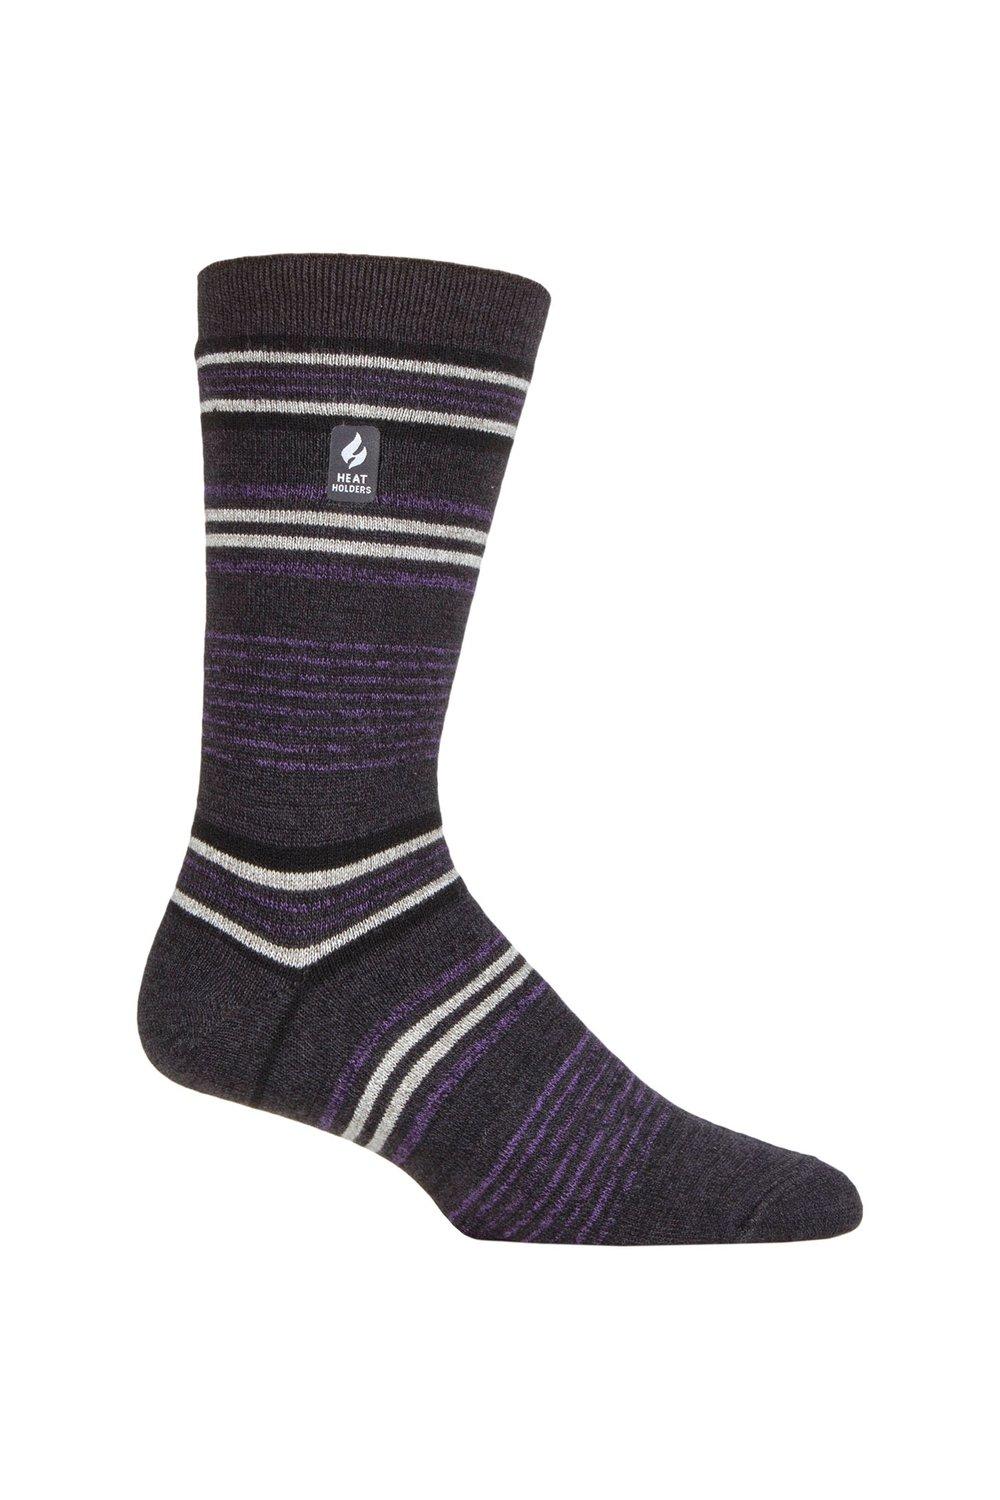 1 Pair 1.0 TOG Ultralite Striped, Argyle and Patterned Socks